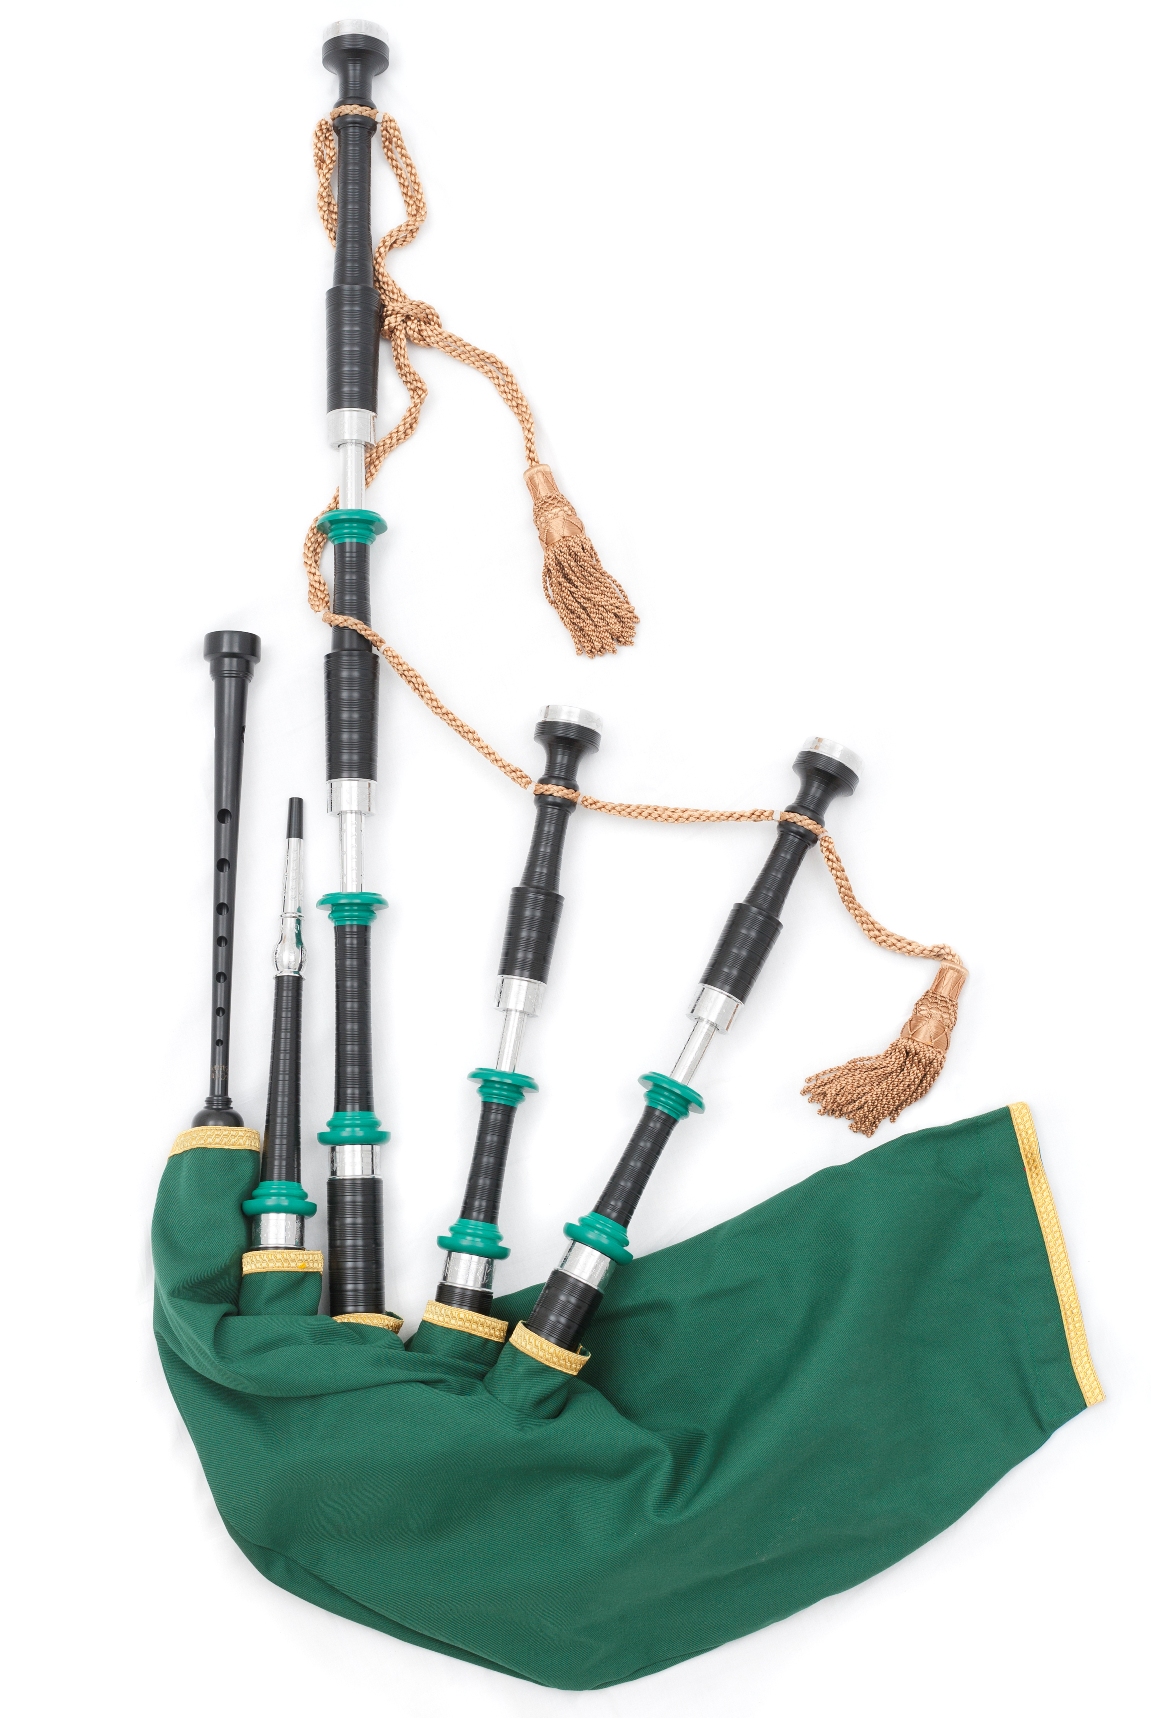 McCallum P4 Themed Acetyl Bagpipes